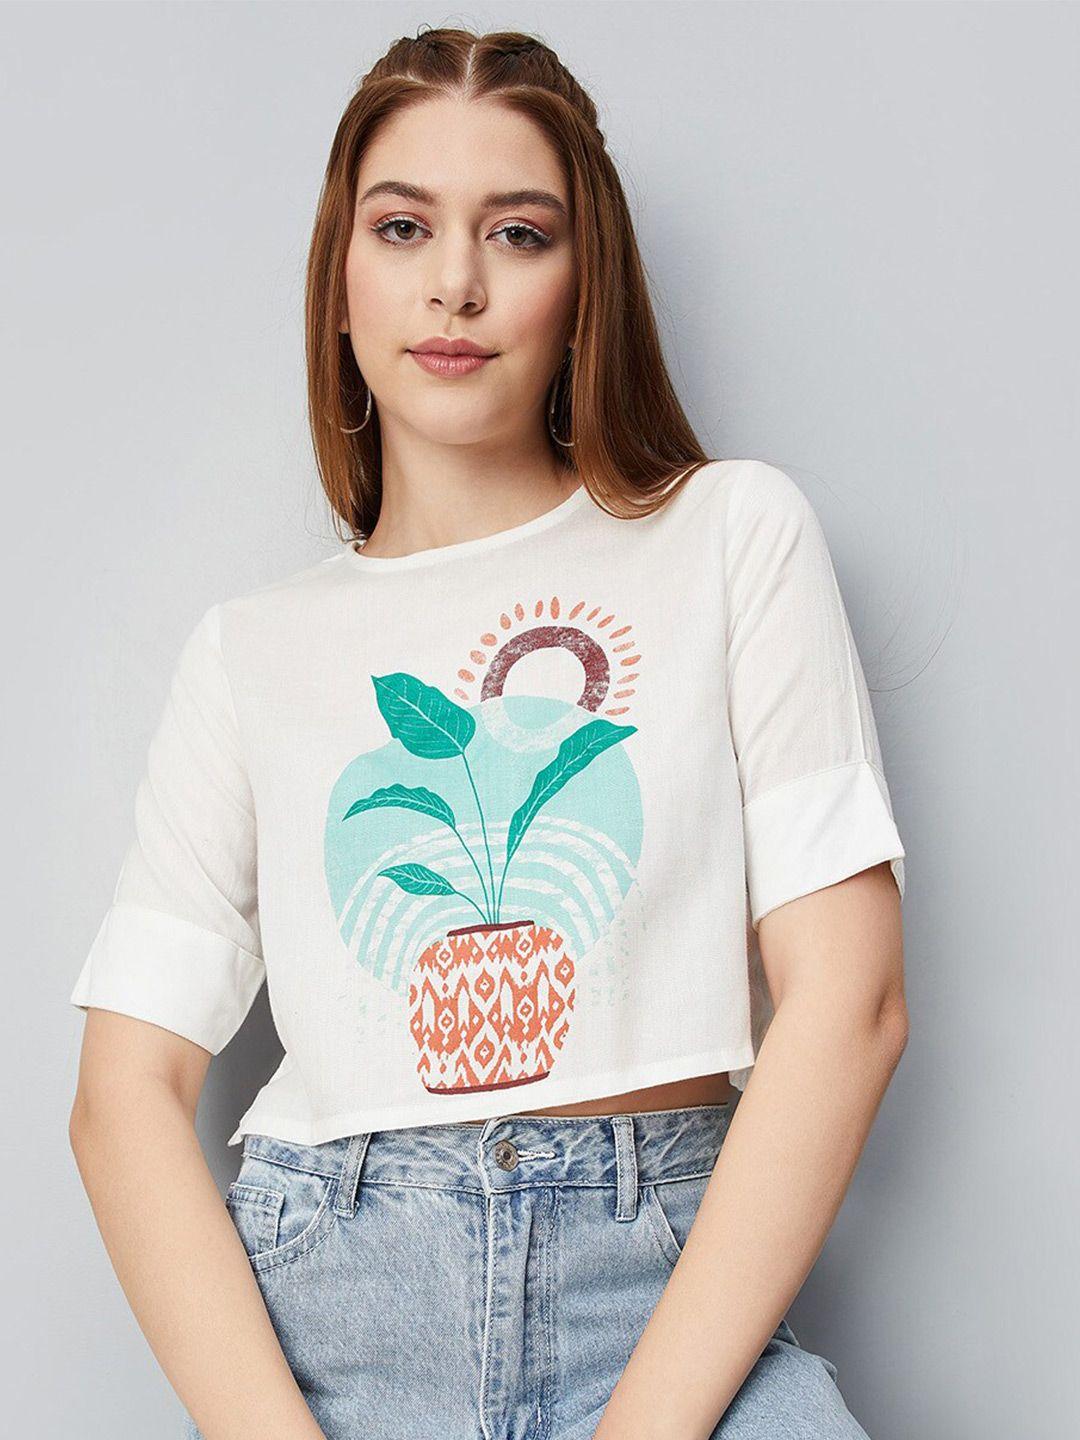 max graphic printed styled back crop top